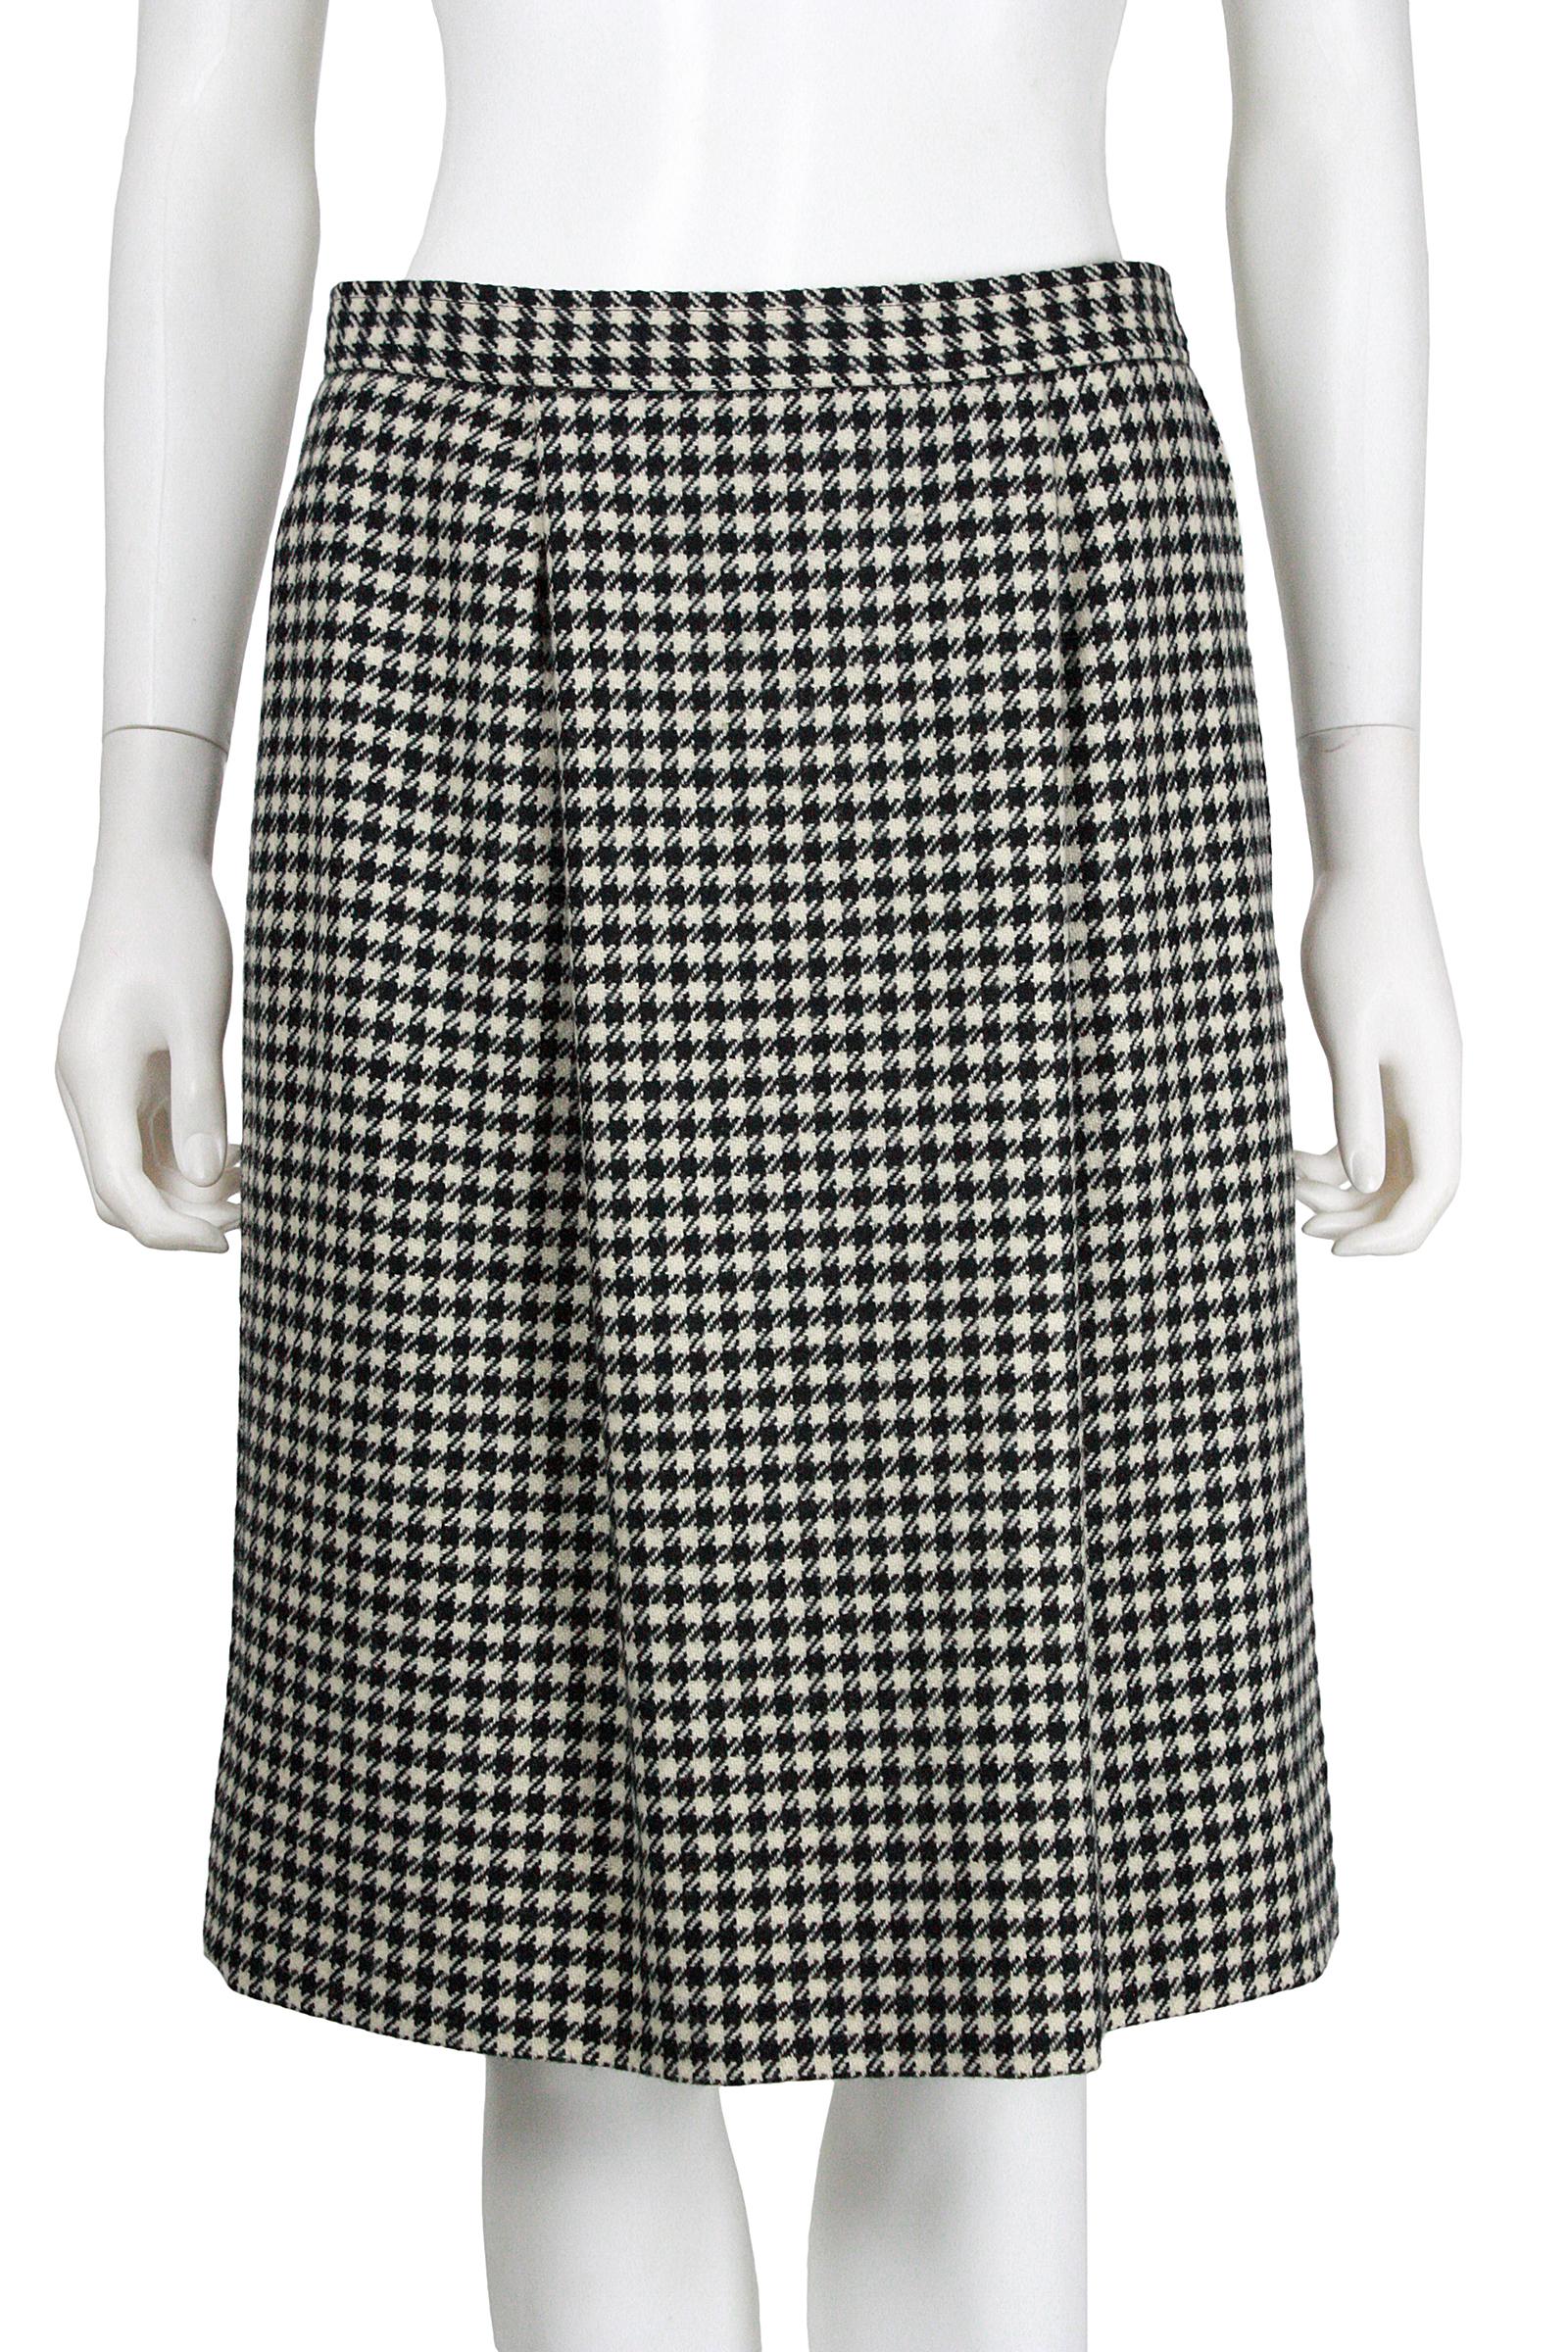 1980s Saint Laurent Rive Gauche Houndstooth Skirt Suit In Good Condition For Sale In Los Angeles, CA